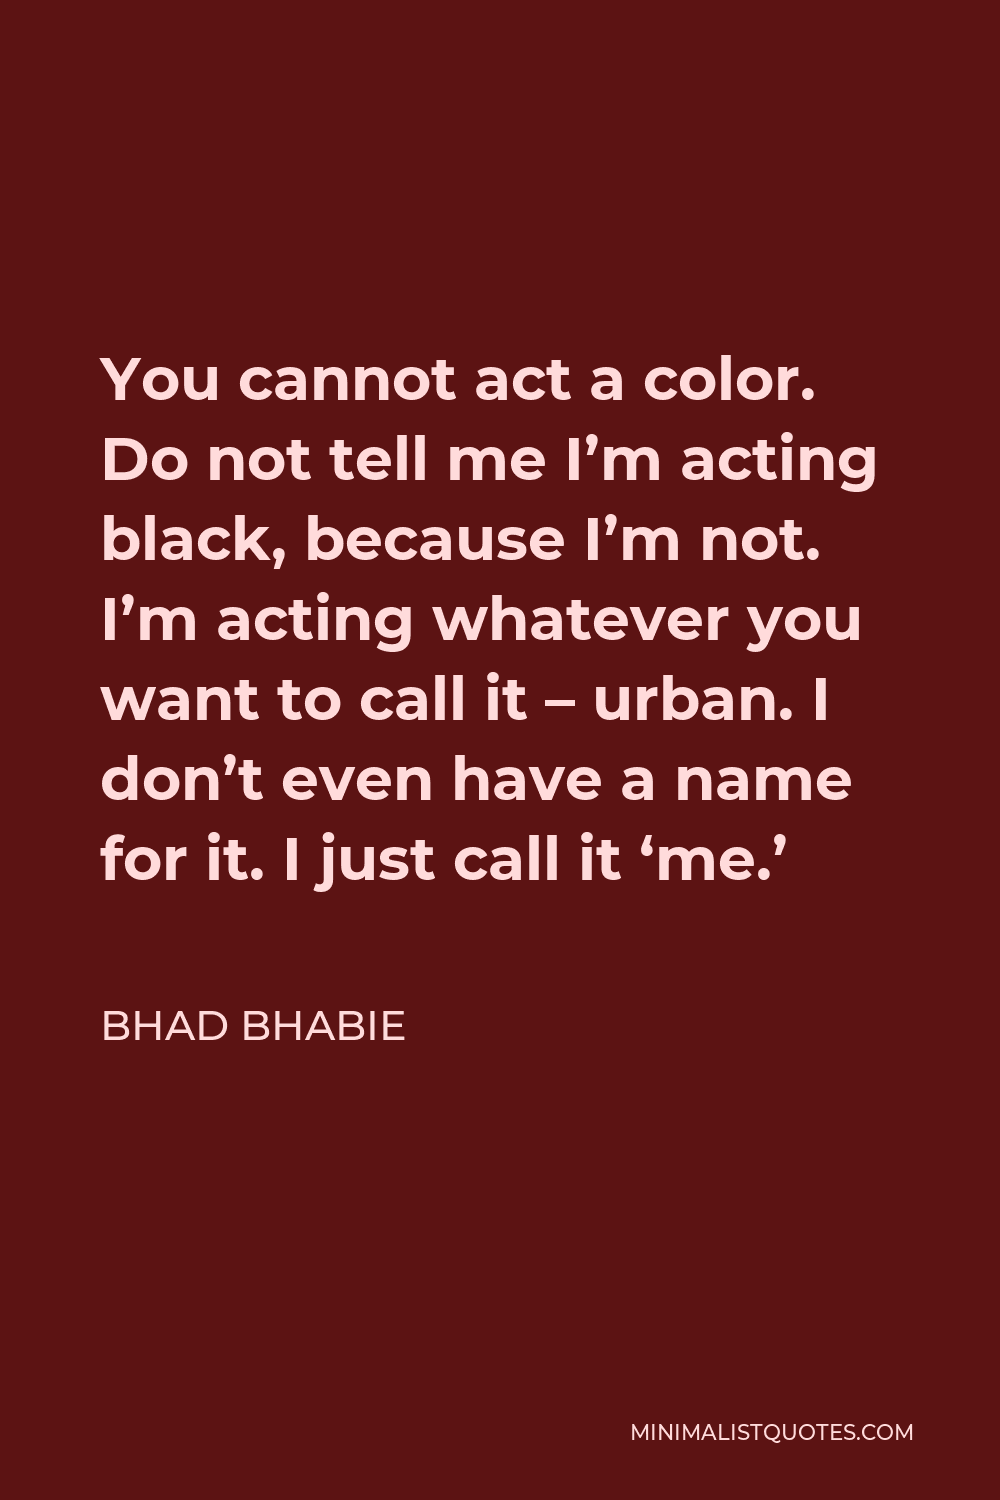 Bhad Bhabie Quote - You cannot act a color. Do not tell me I’m acting black, because I’m not. I’m acting whatever you want to call it – urban. I don’t even have a name for it. I just call it ‘me.’